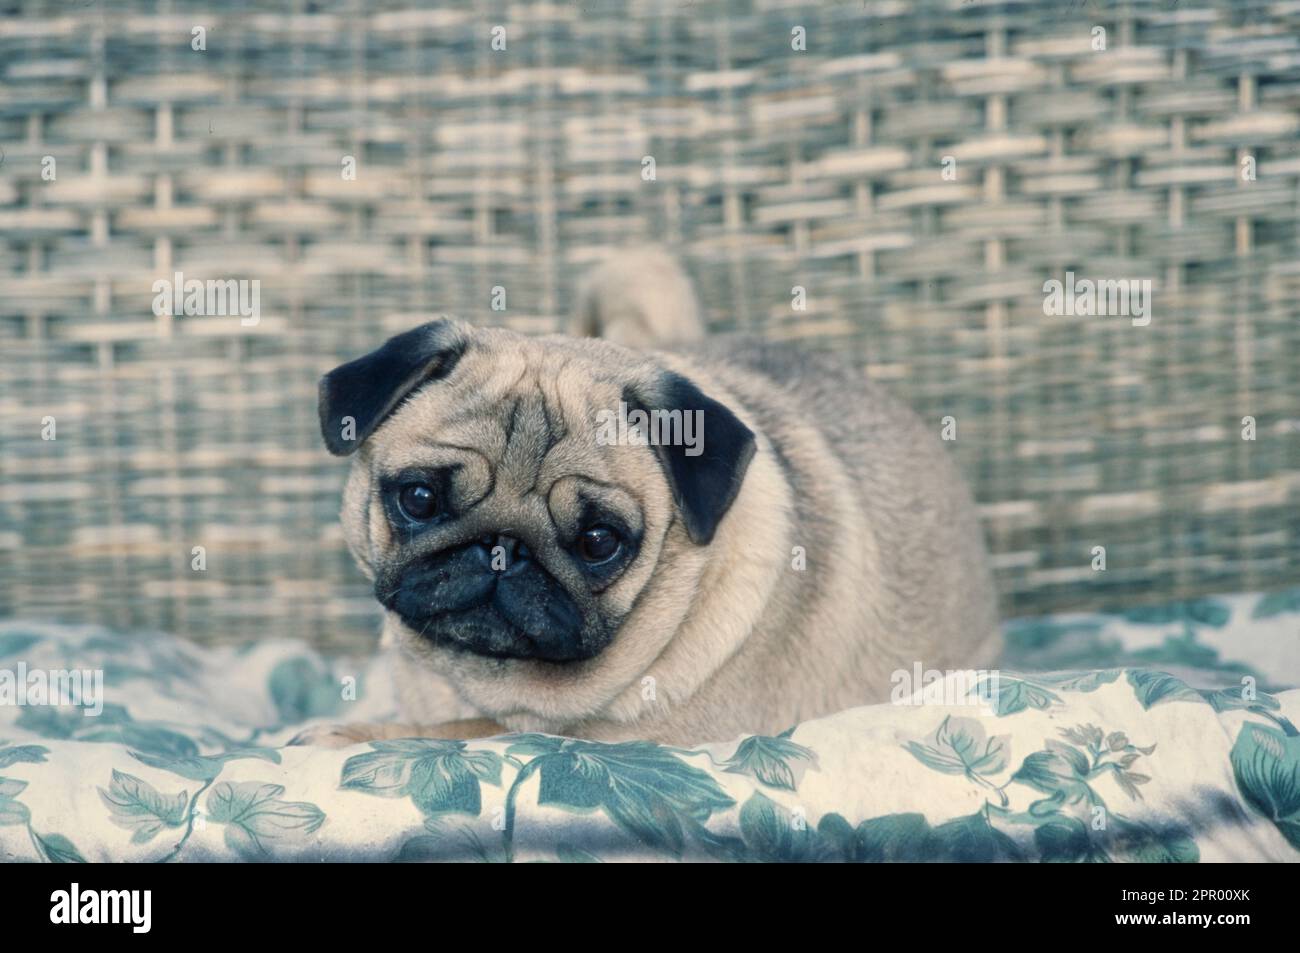 Pug laying on cushion on wicker seat with head tilted to side Stock Photo